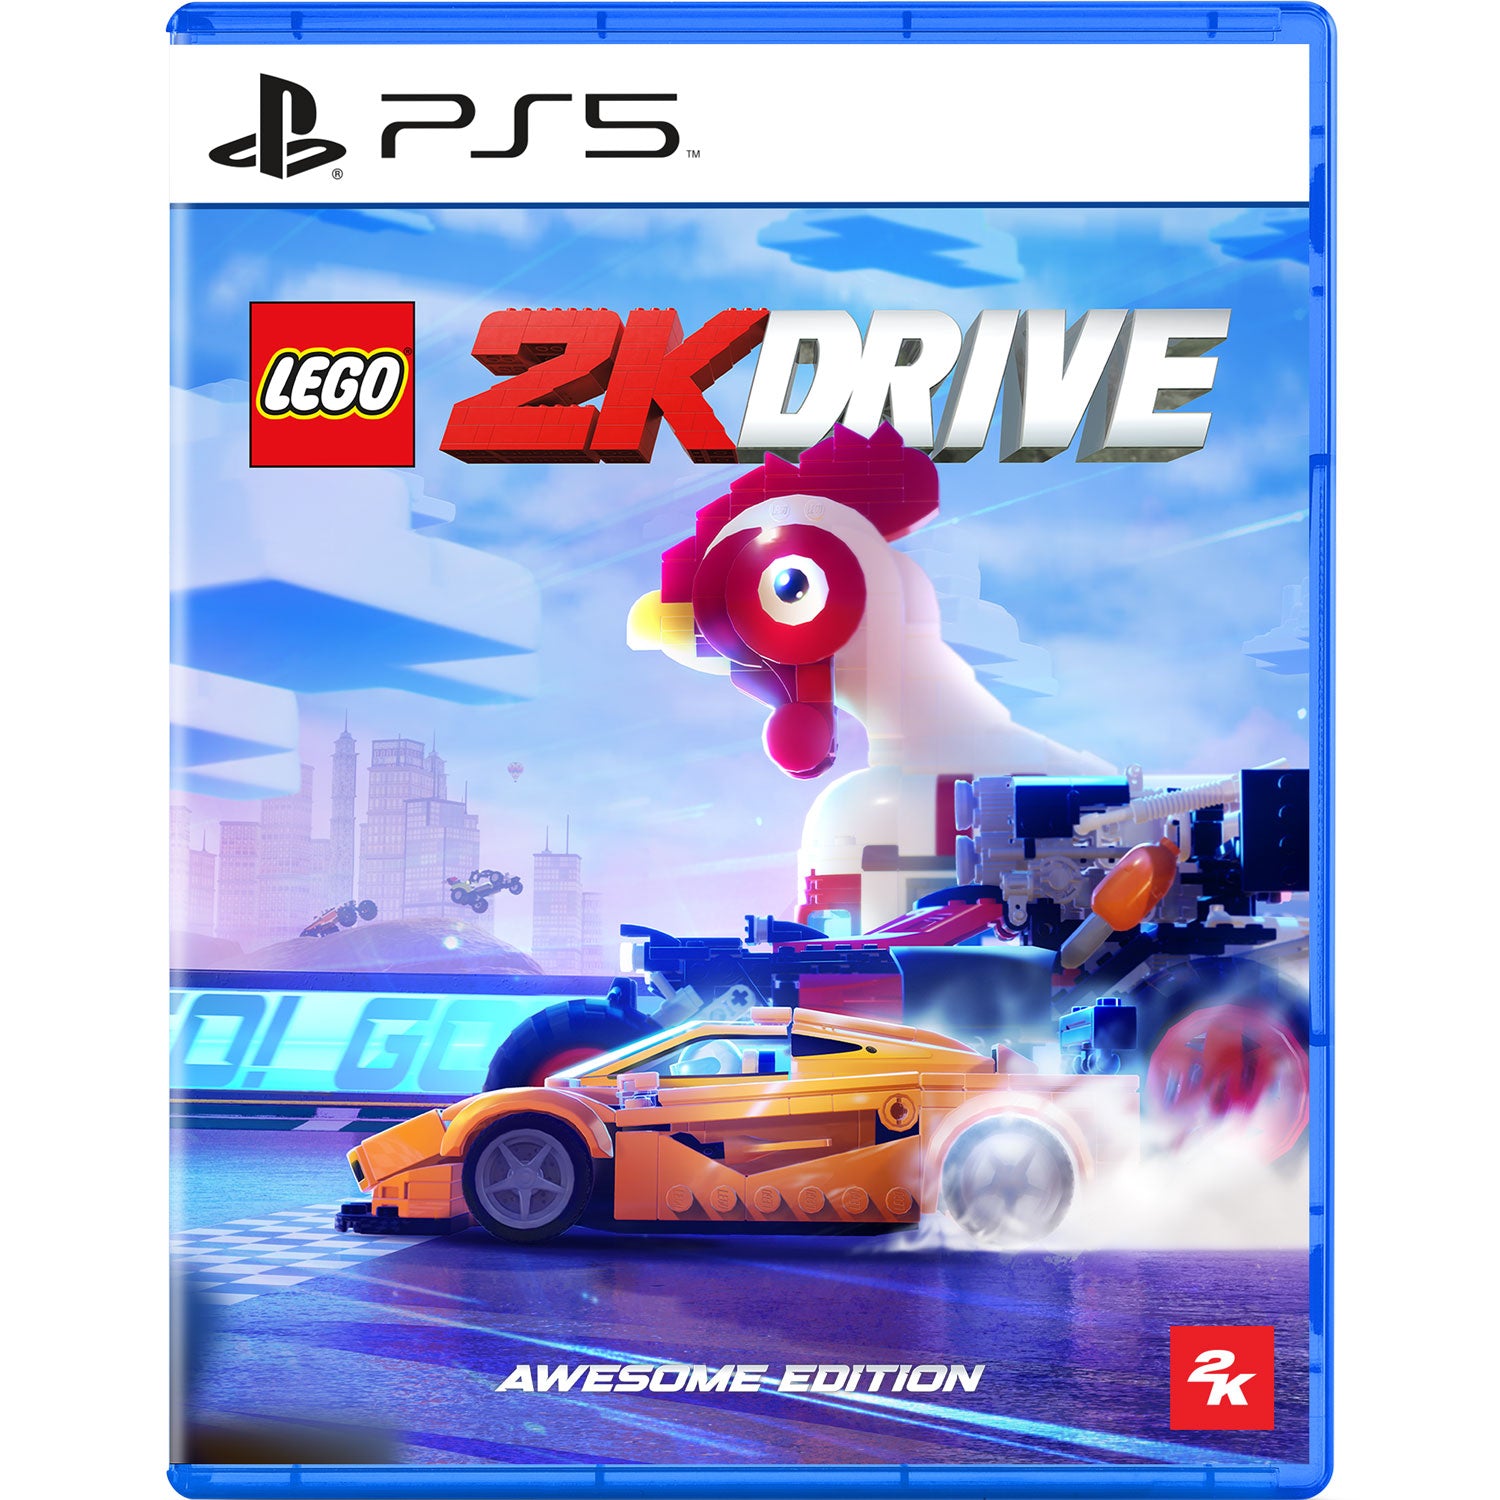 PS5 LEGO 2K Drive [Awesome Edition]